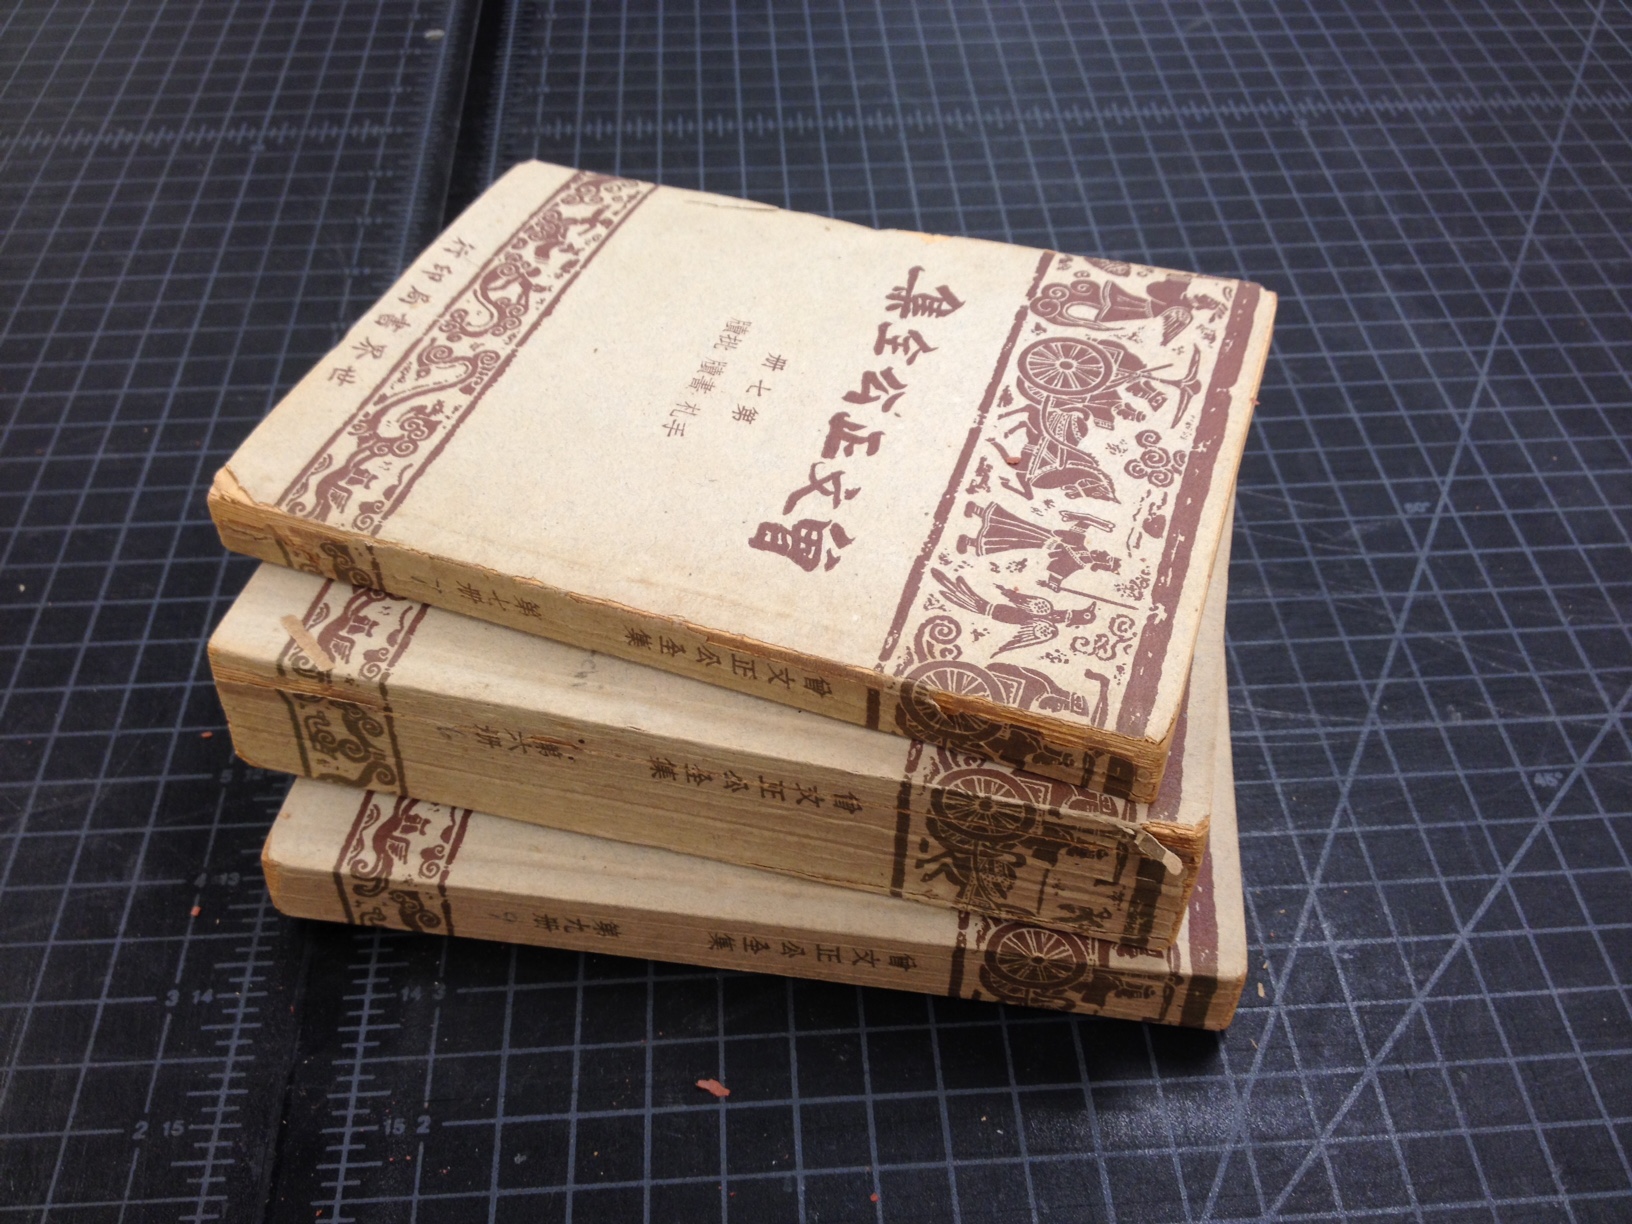 A set of Chinese books that are disintegrating due to acidic paper.